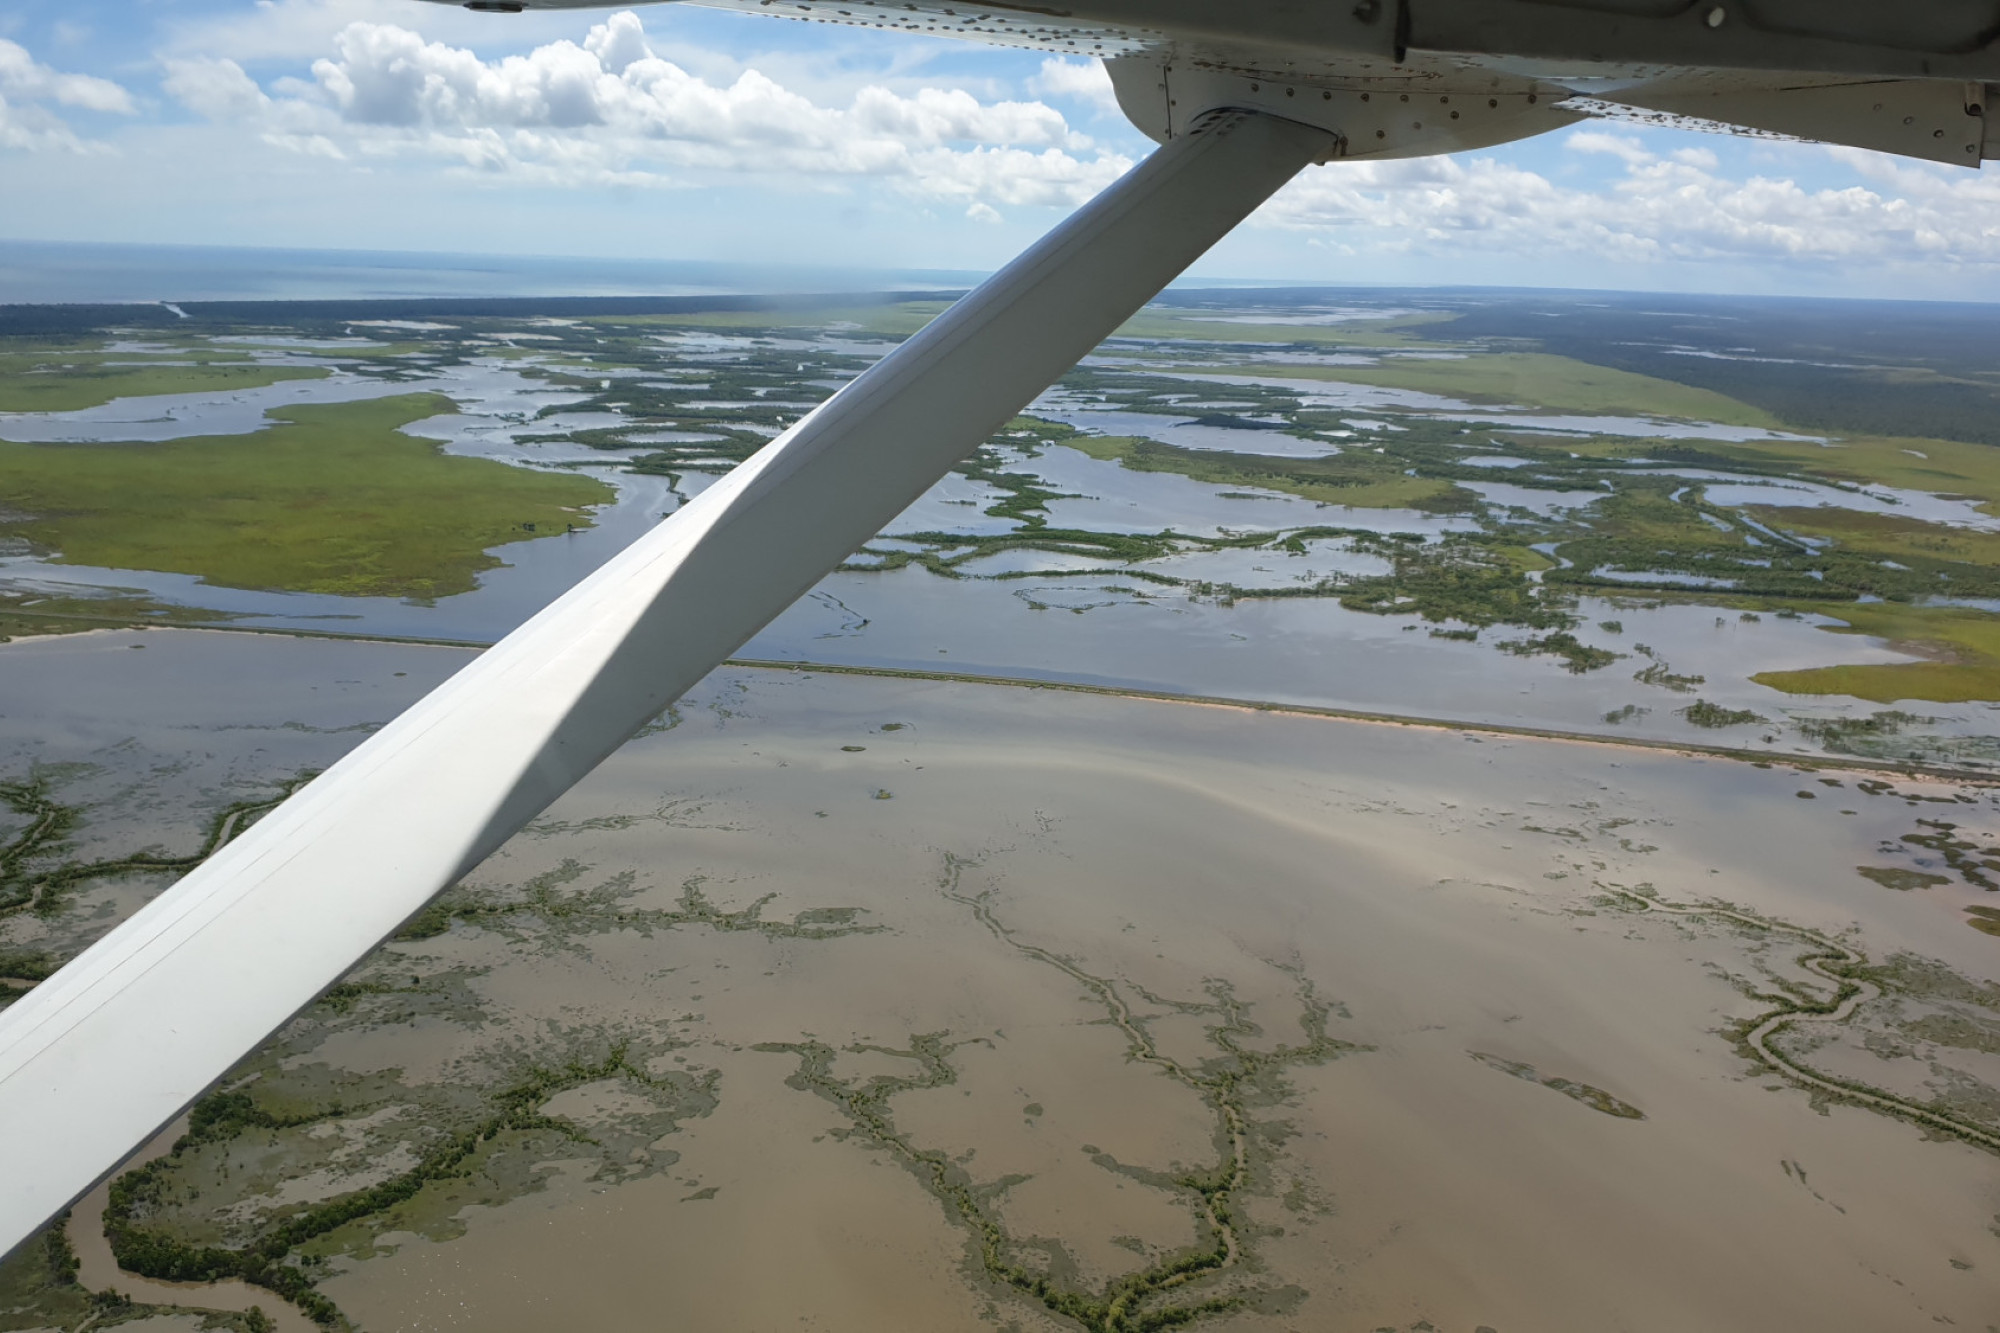 Remote Cape York communities will have their provisions delivered from the sky after ex-Tropical Cyclone Imogen has reduced the roads inaccessible